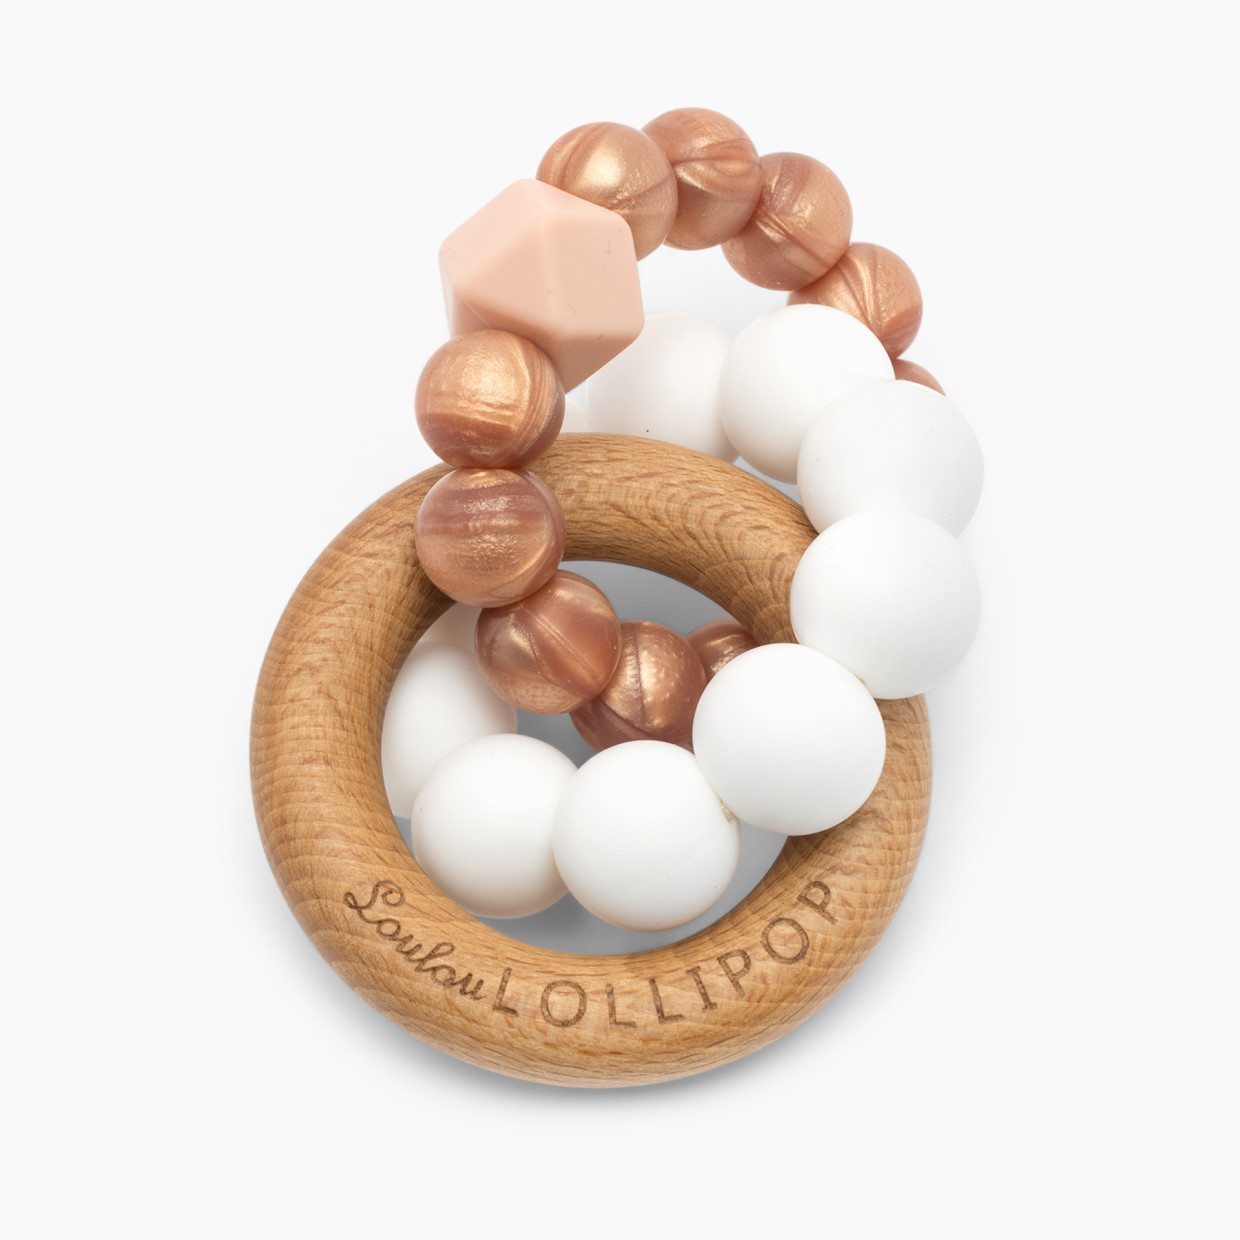 Loulou Lollipop Trinity Silicone & Wood Teether - Rose Gold.